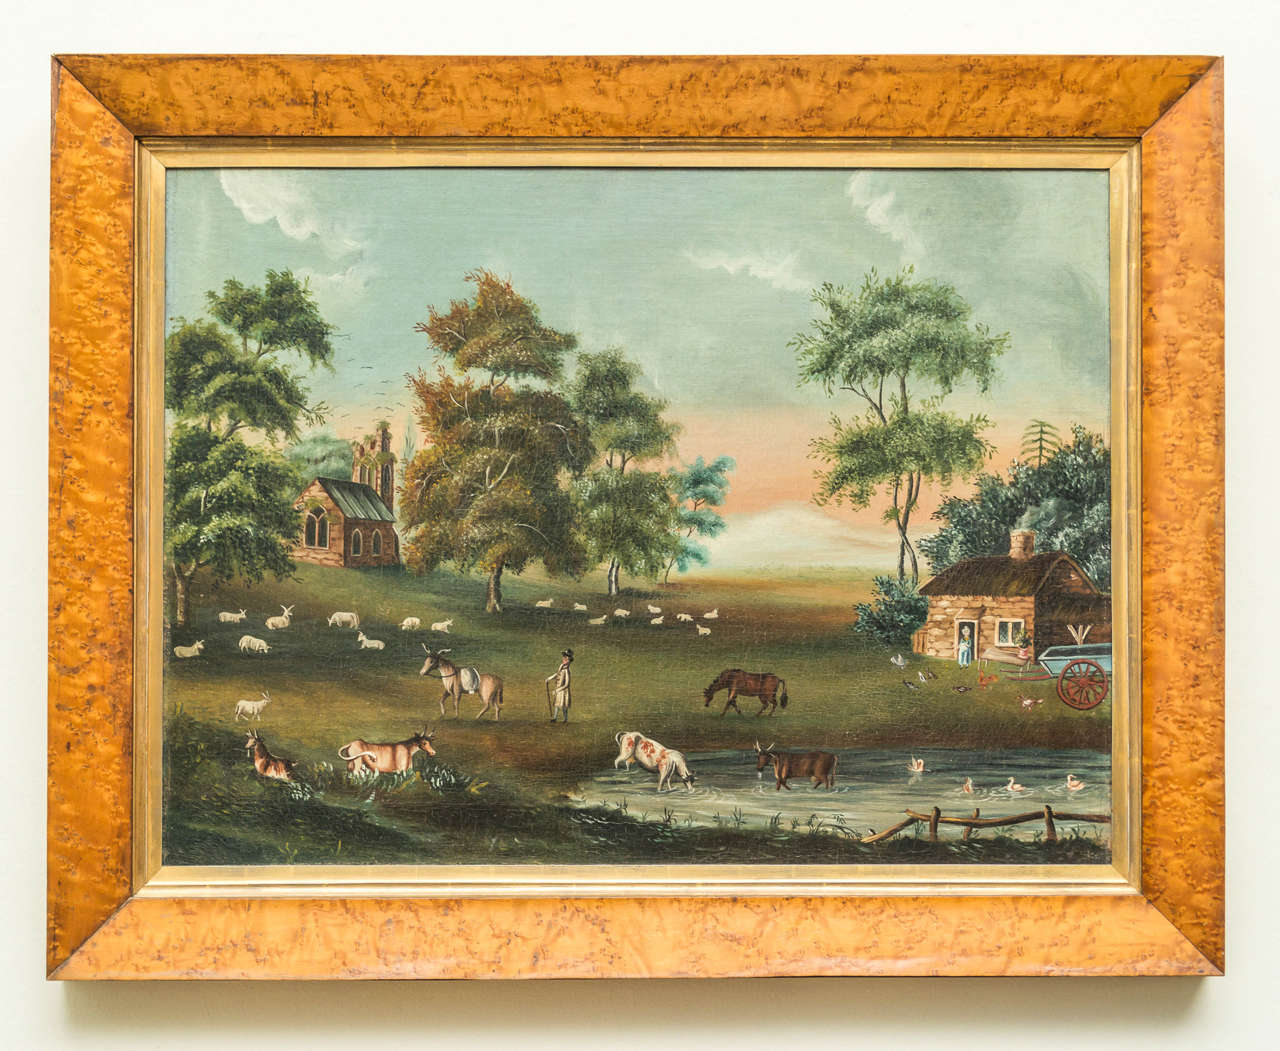 Early 19th century, English naive landscape painting with bird's-eye maple frame. Cleaned and stretched with good aged surface, circa 1825.